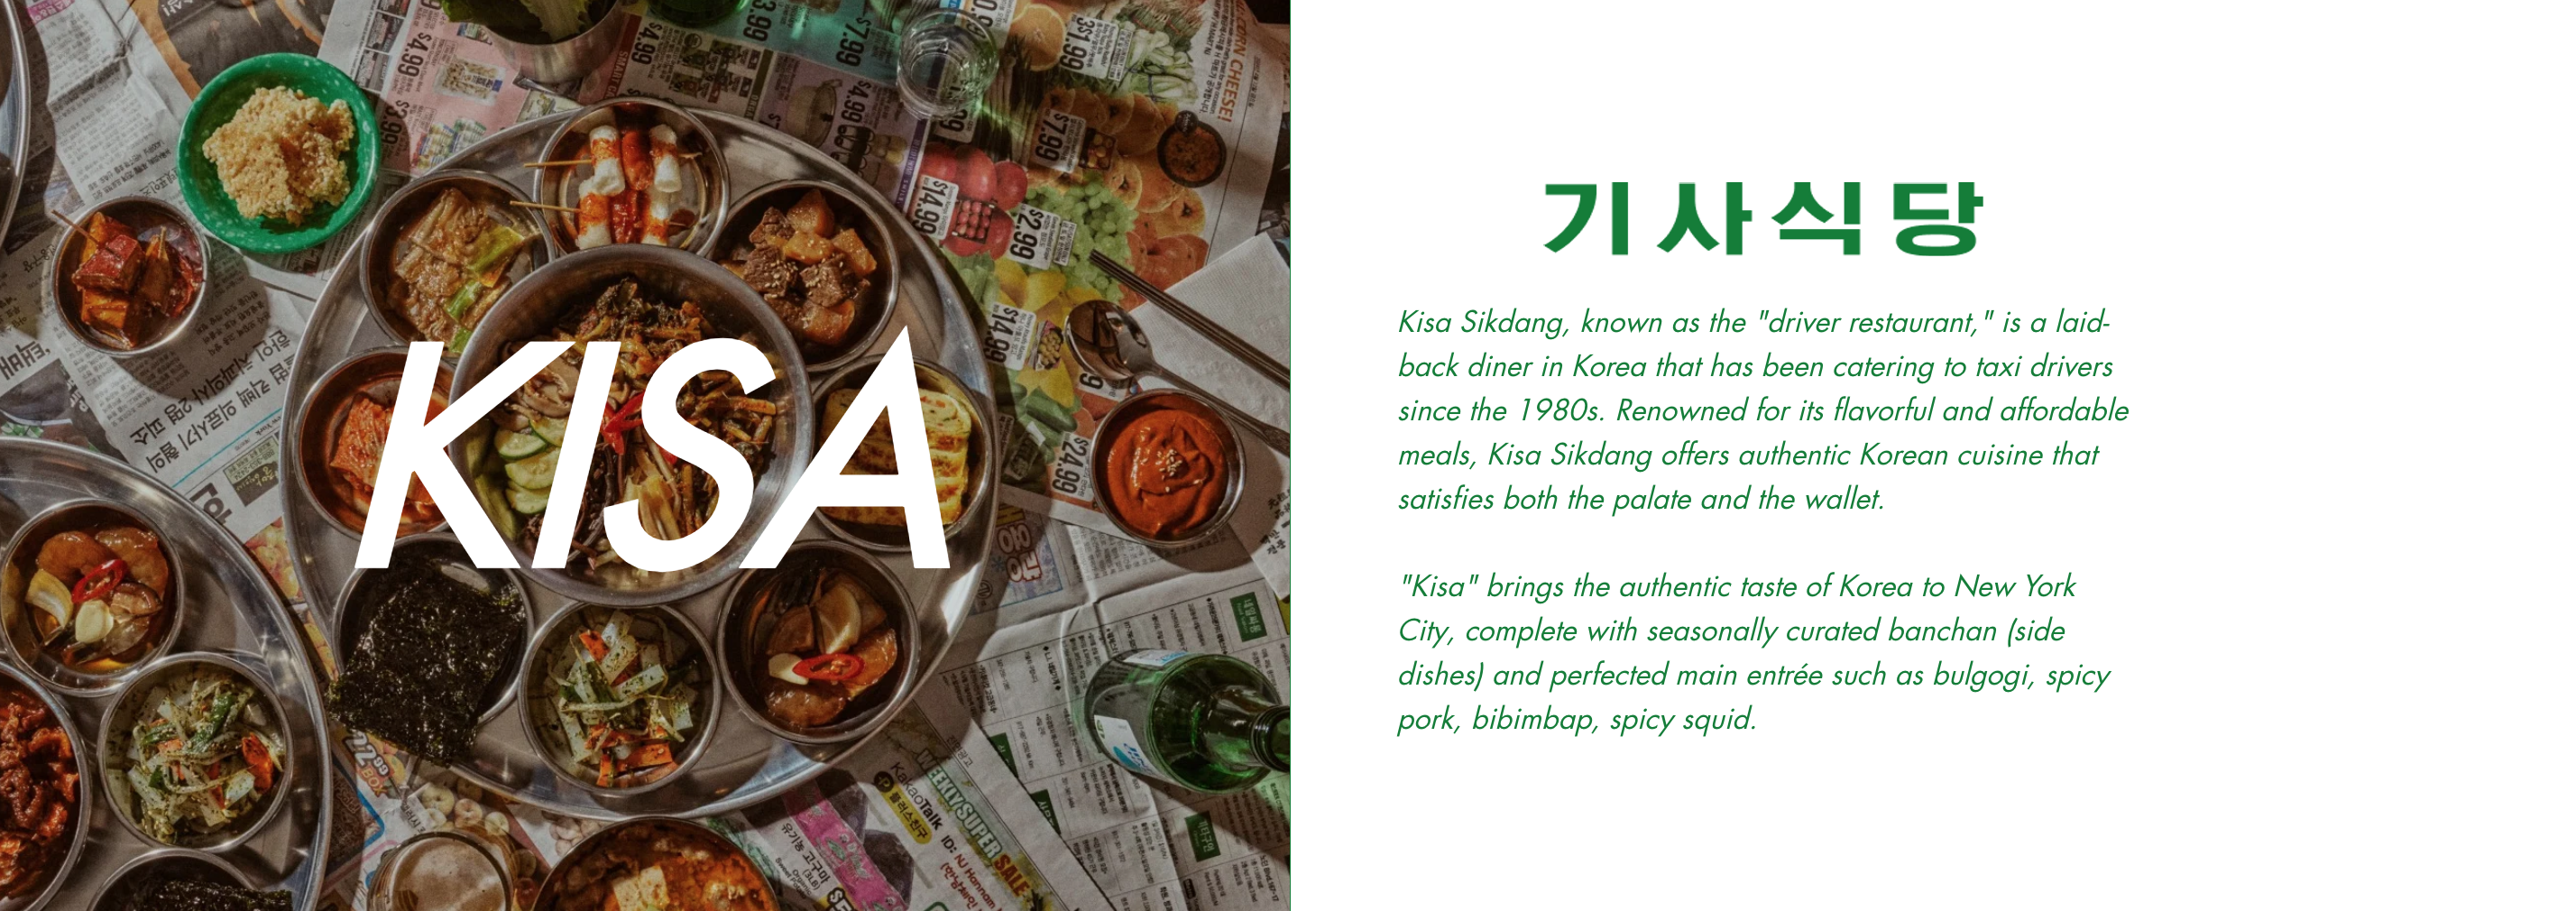 Exploring Korea’s Gisa Sikdang: A Place Where Tradition and Modernity Coexist